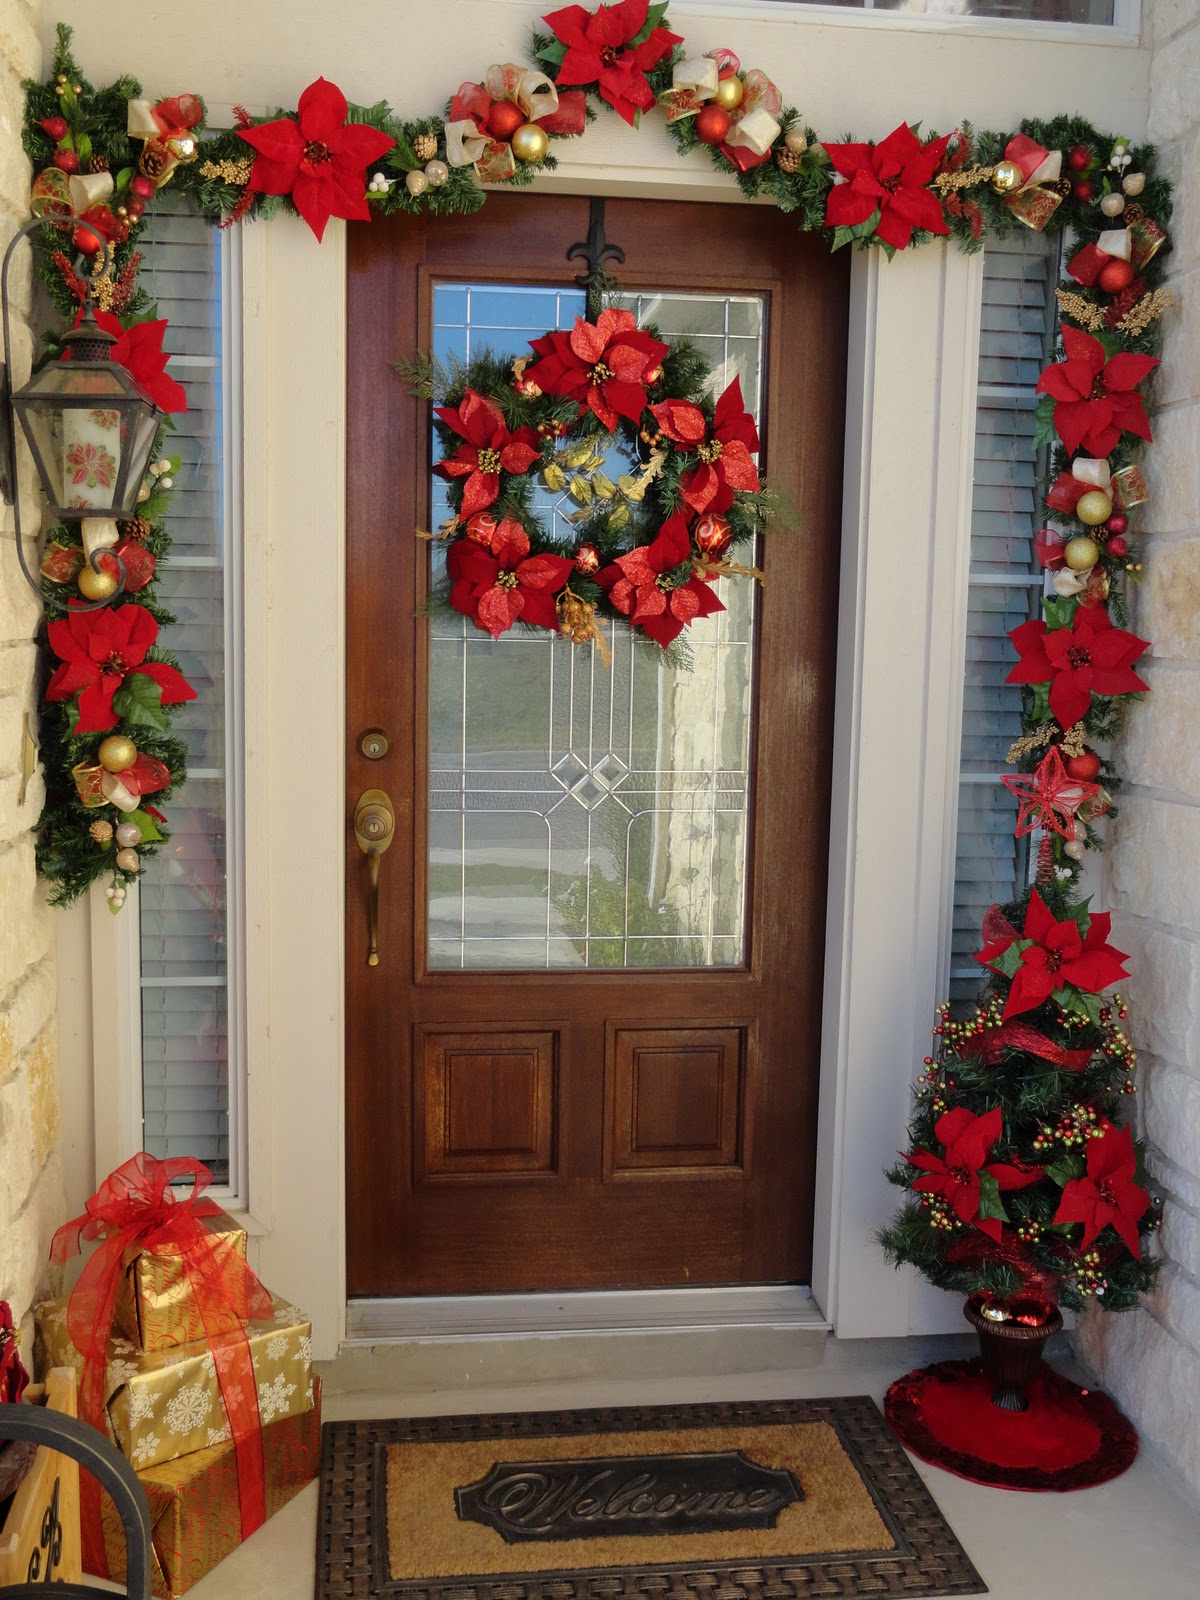 Our Home Away From Home: FRONT DOOR CHRISTMAS DECOR